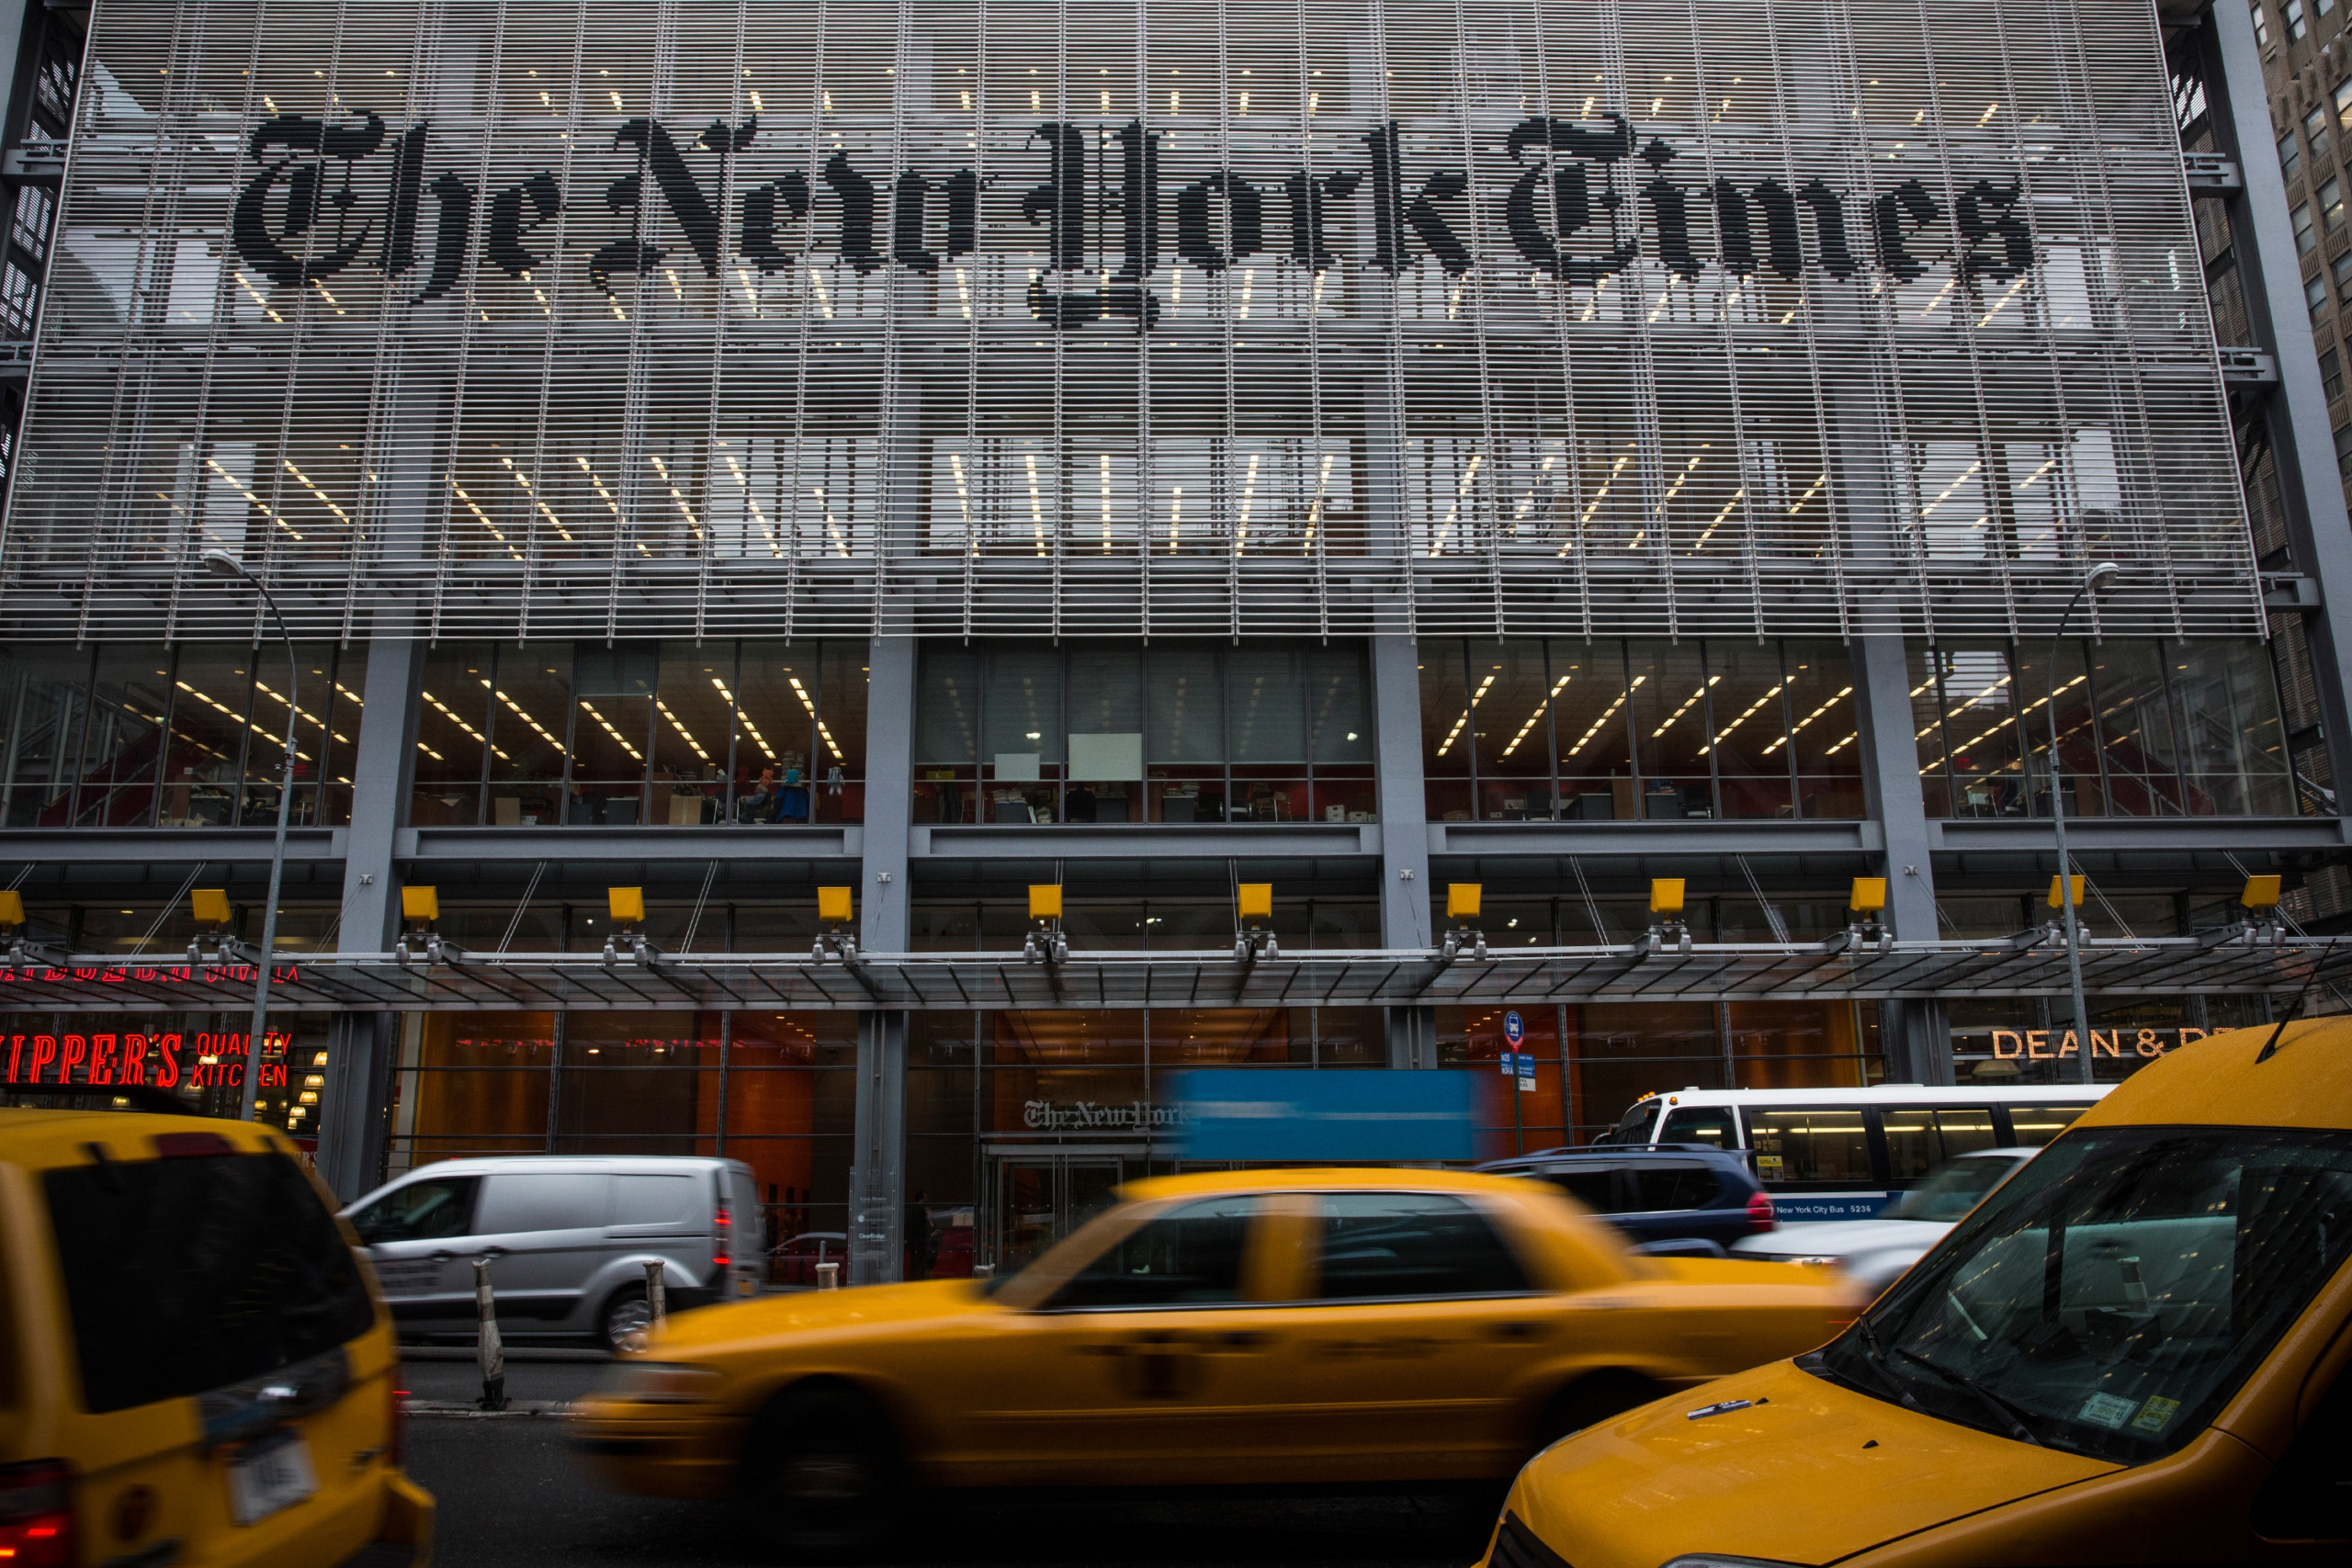 Police: Man With Ax, Sword Asked to Enter New York Times Newsroom